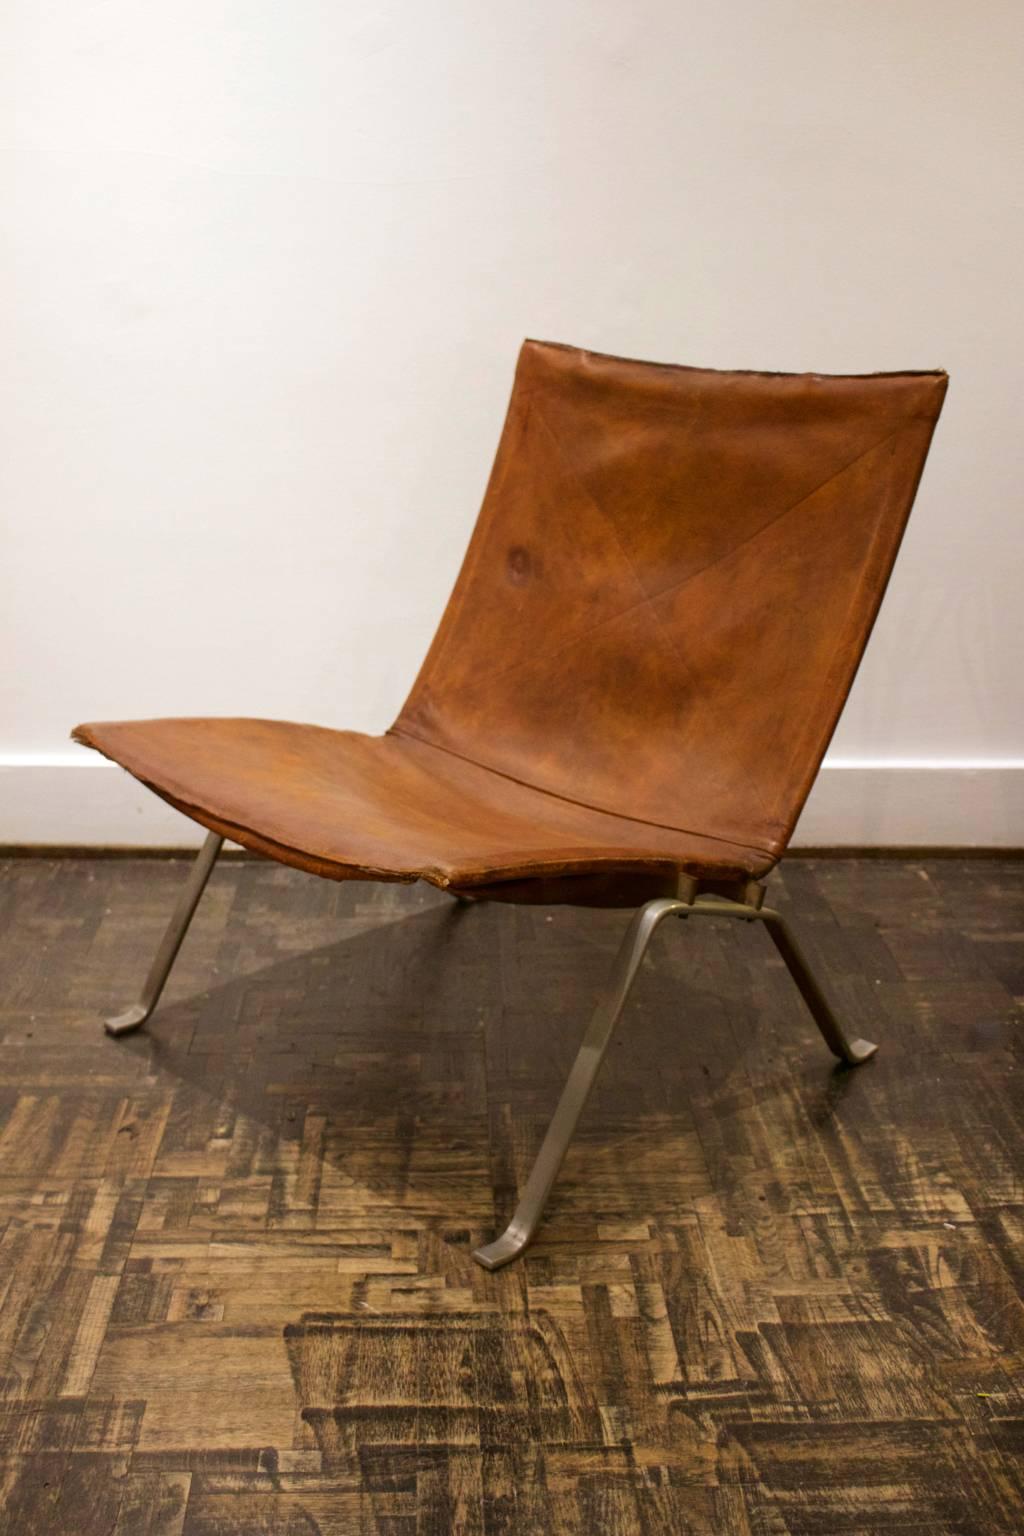 Scandinavian Modern Early PK22 by Poul Kjaerholm with Nickel Frame and Original Tan Leather